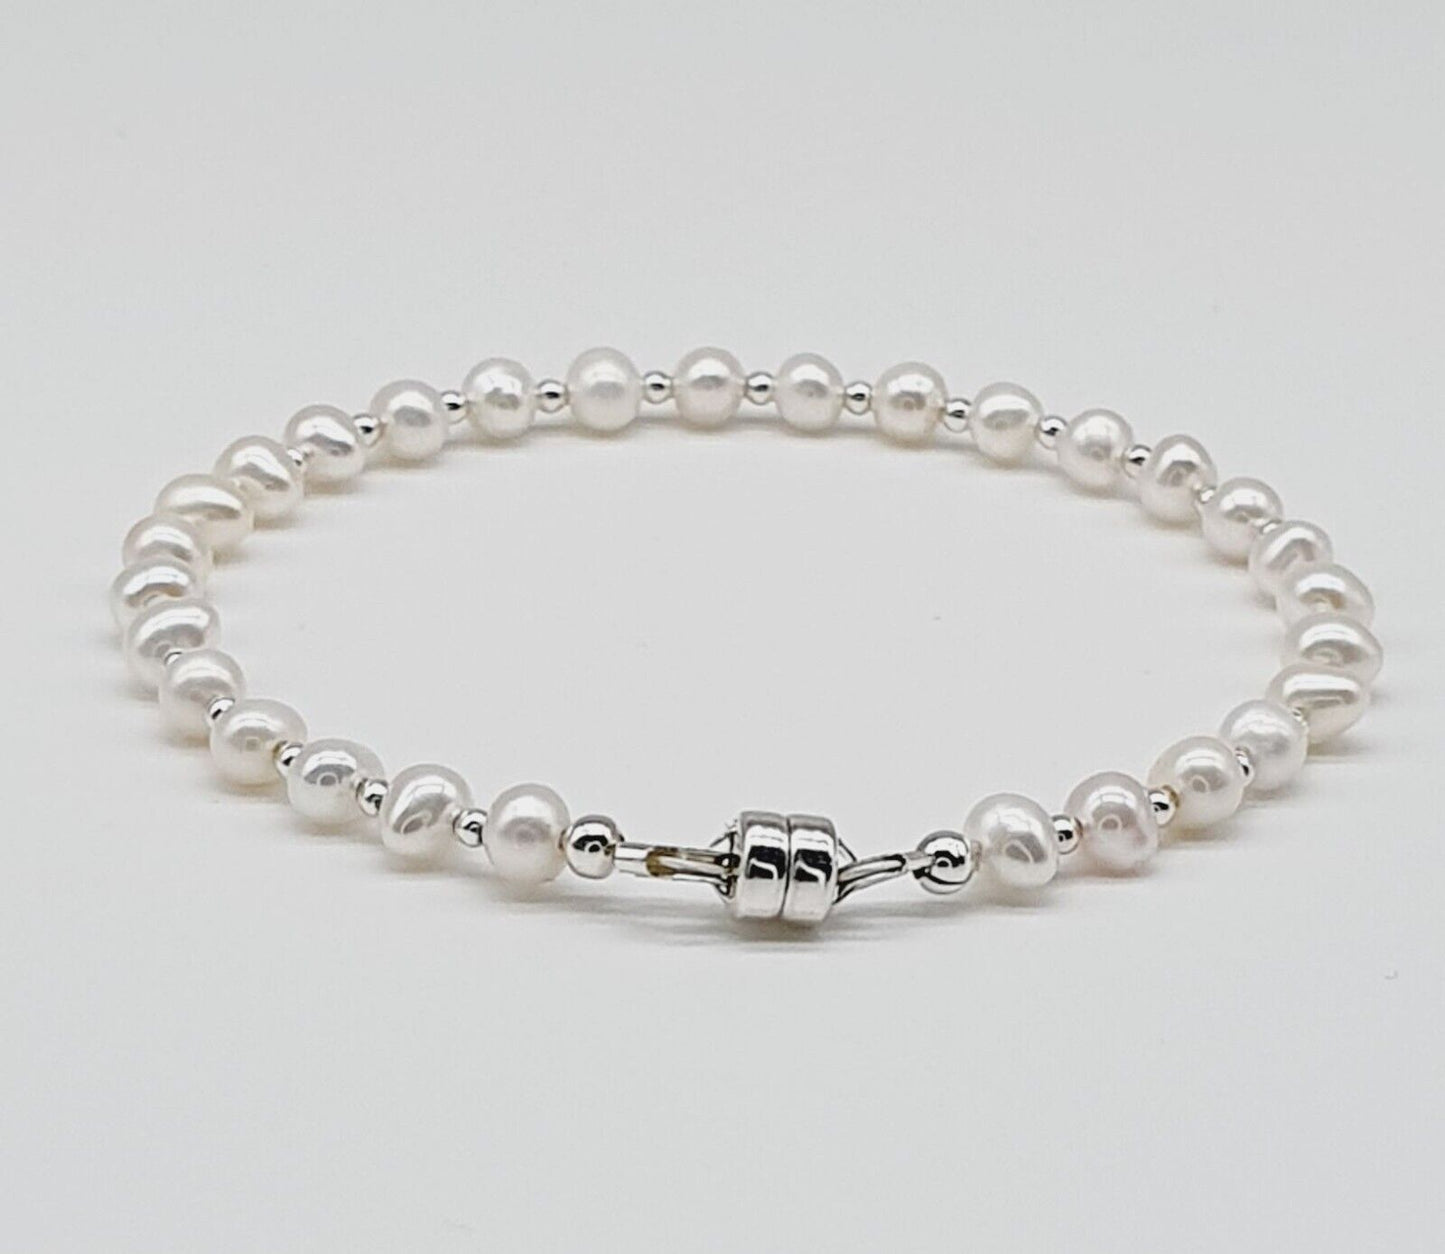 White Natural Freshwater Pearls 925 Sterling Silver Bracelet with Magnetic Clasp